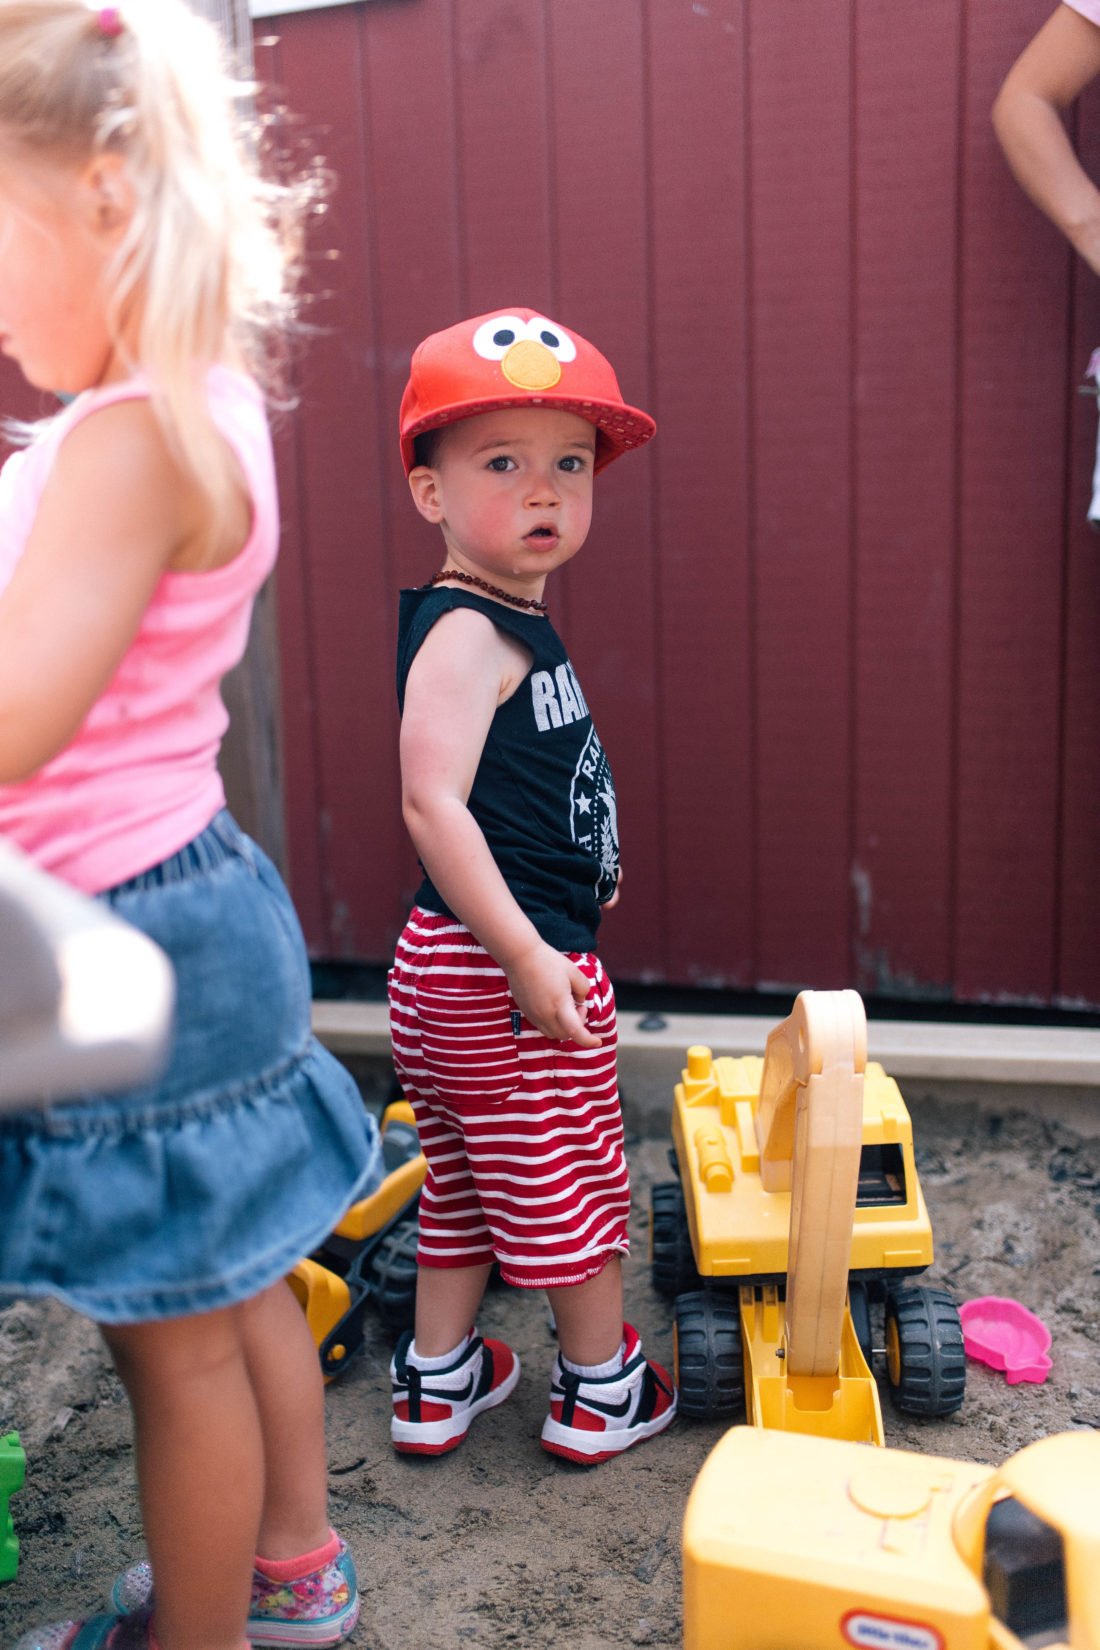 Major Martino stands in the sand box in Connecticut, wearing striped shorts and an elmo hat